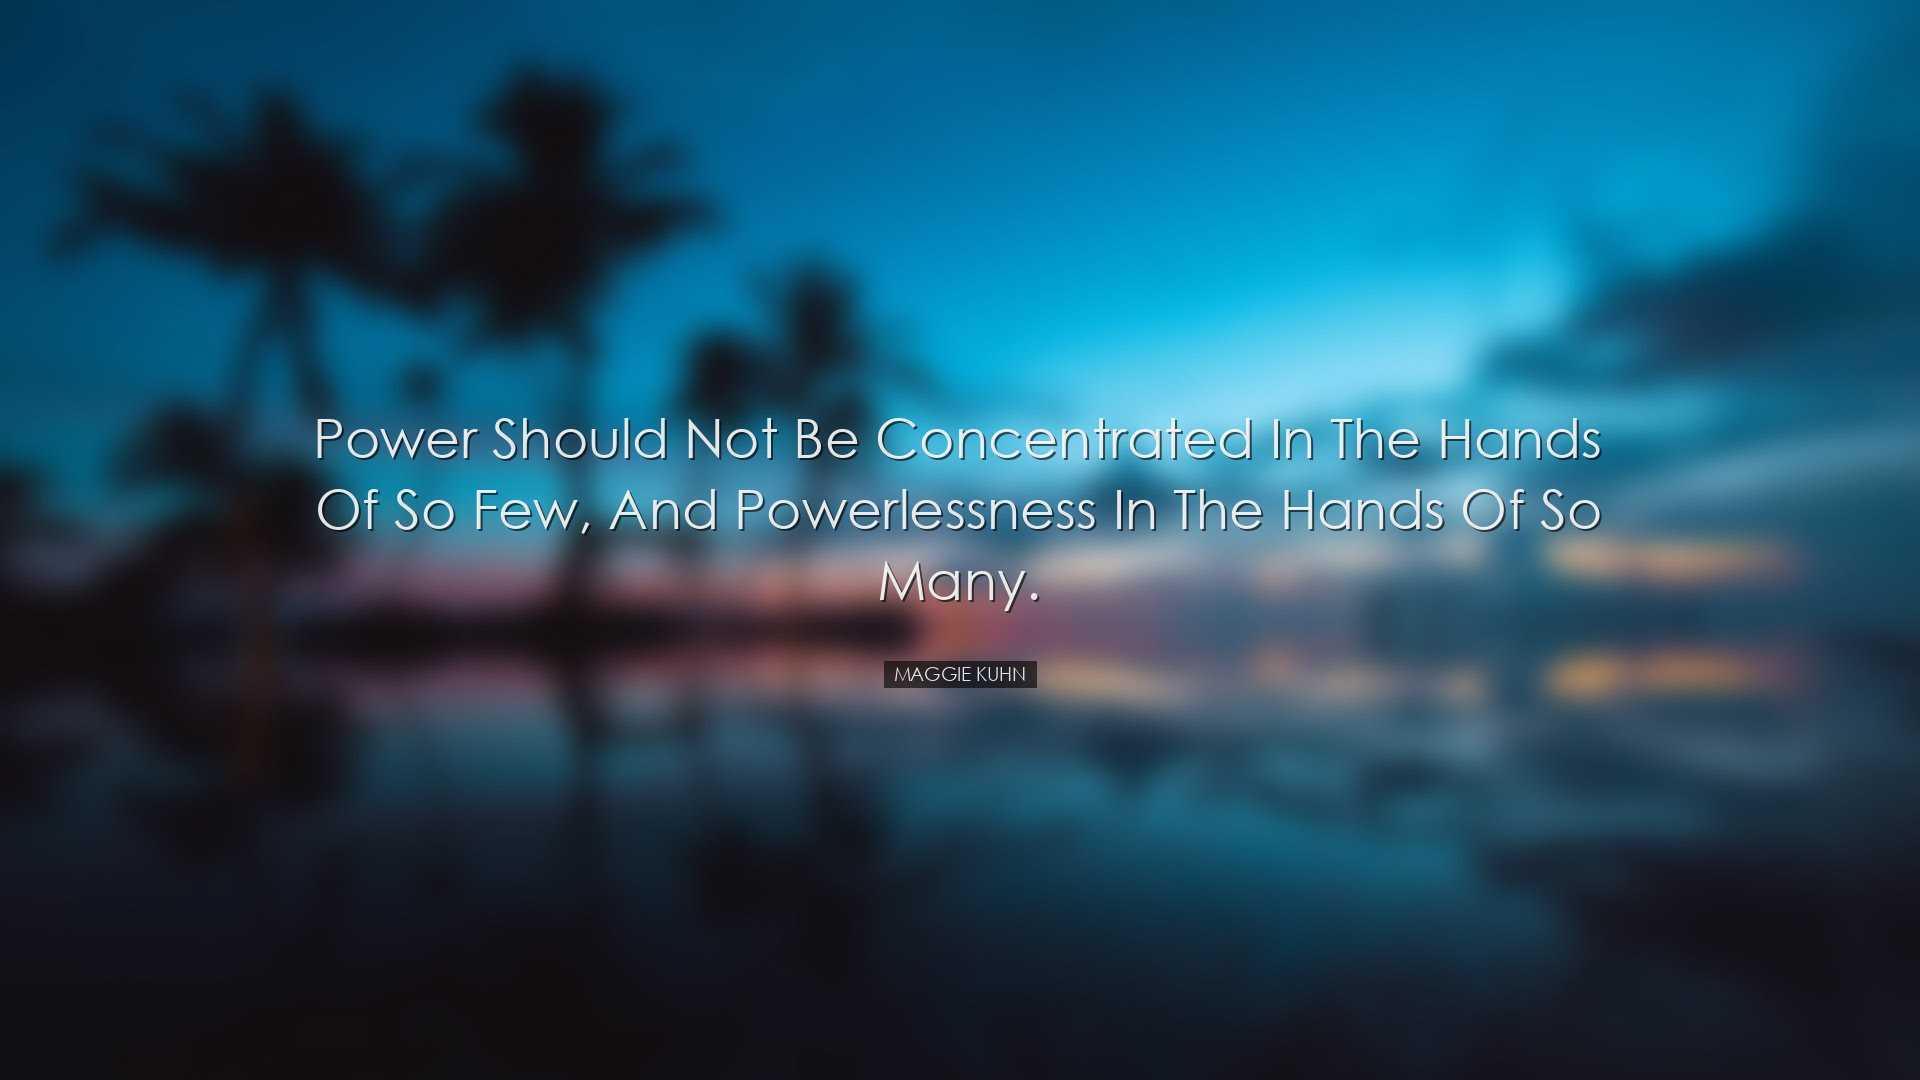 Power should not be concentrated in the hands of so few, and power